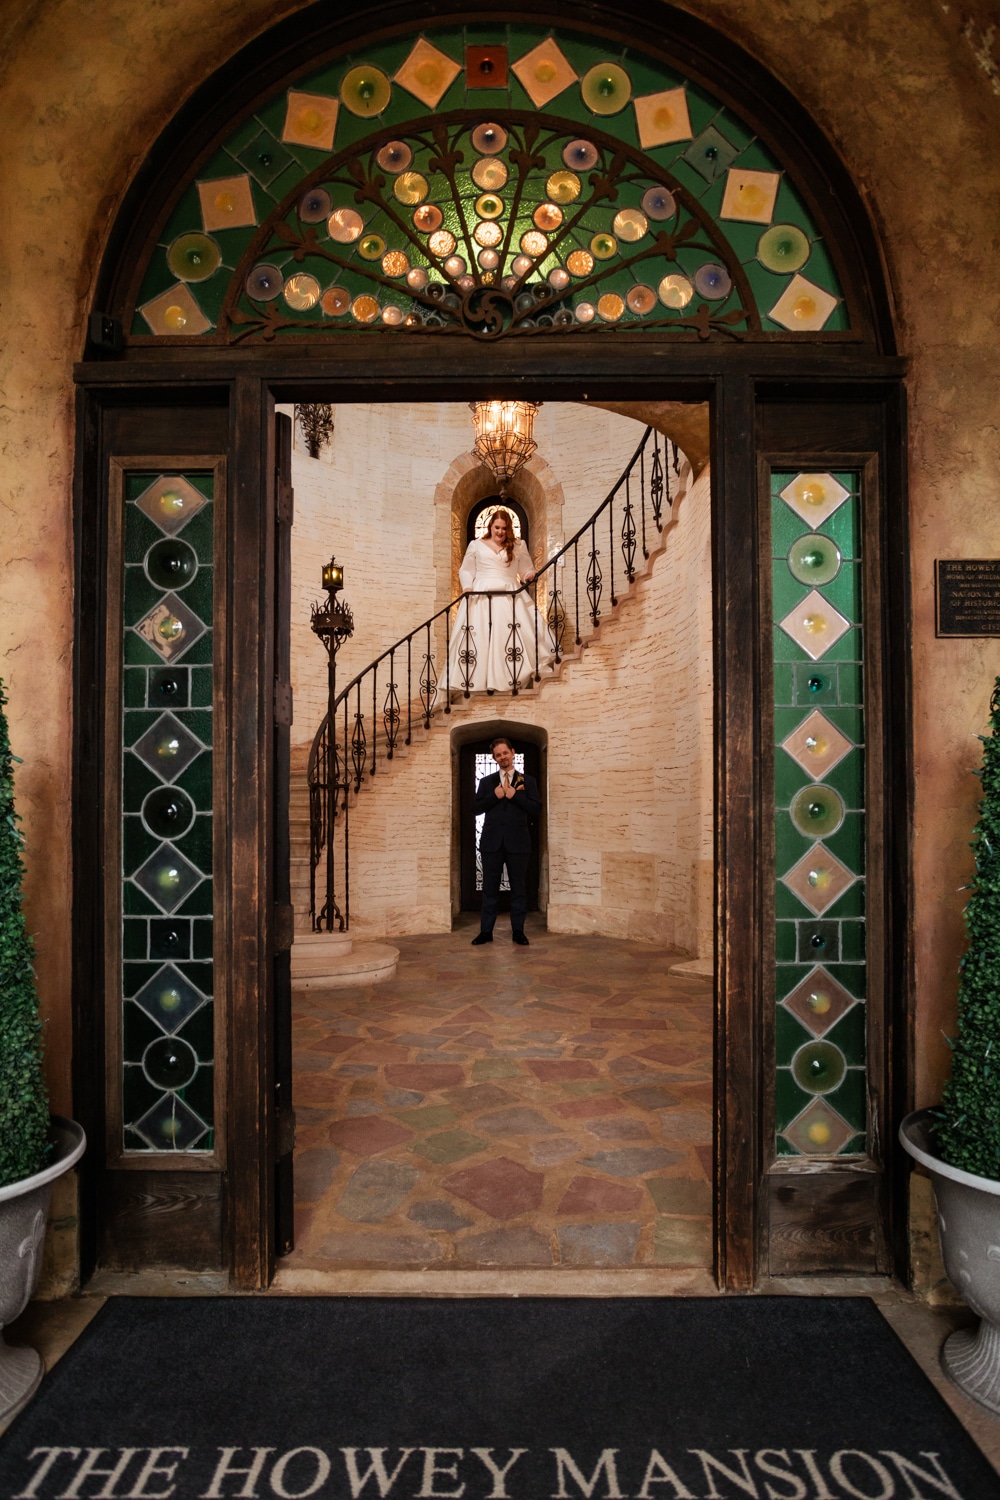 Bride and groom pose for photos in front of stunning entryway at The Howey Mansion wedding venue in Central Florida